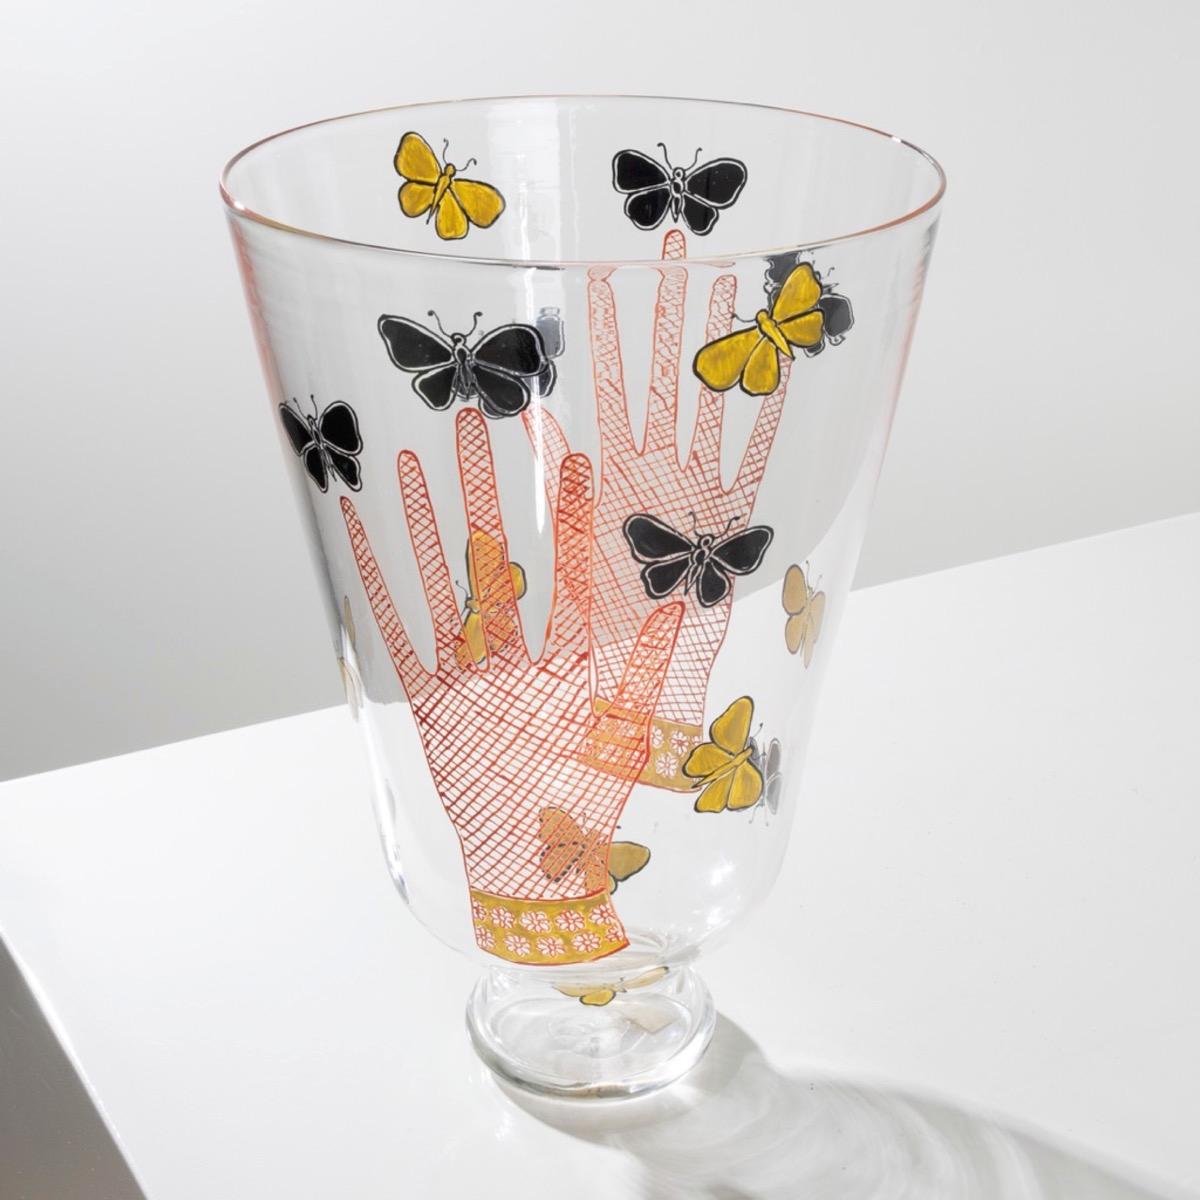 20th Century Vase with Hands and Butterflies by Piero Fornasetti, S.A.L.I.R